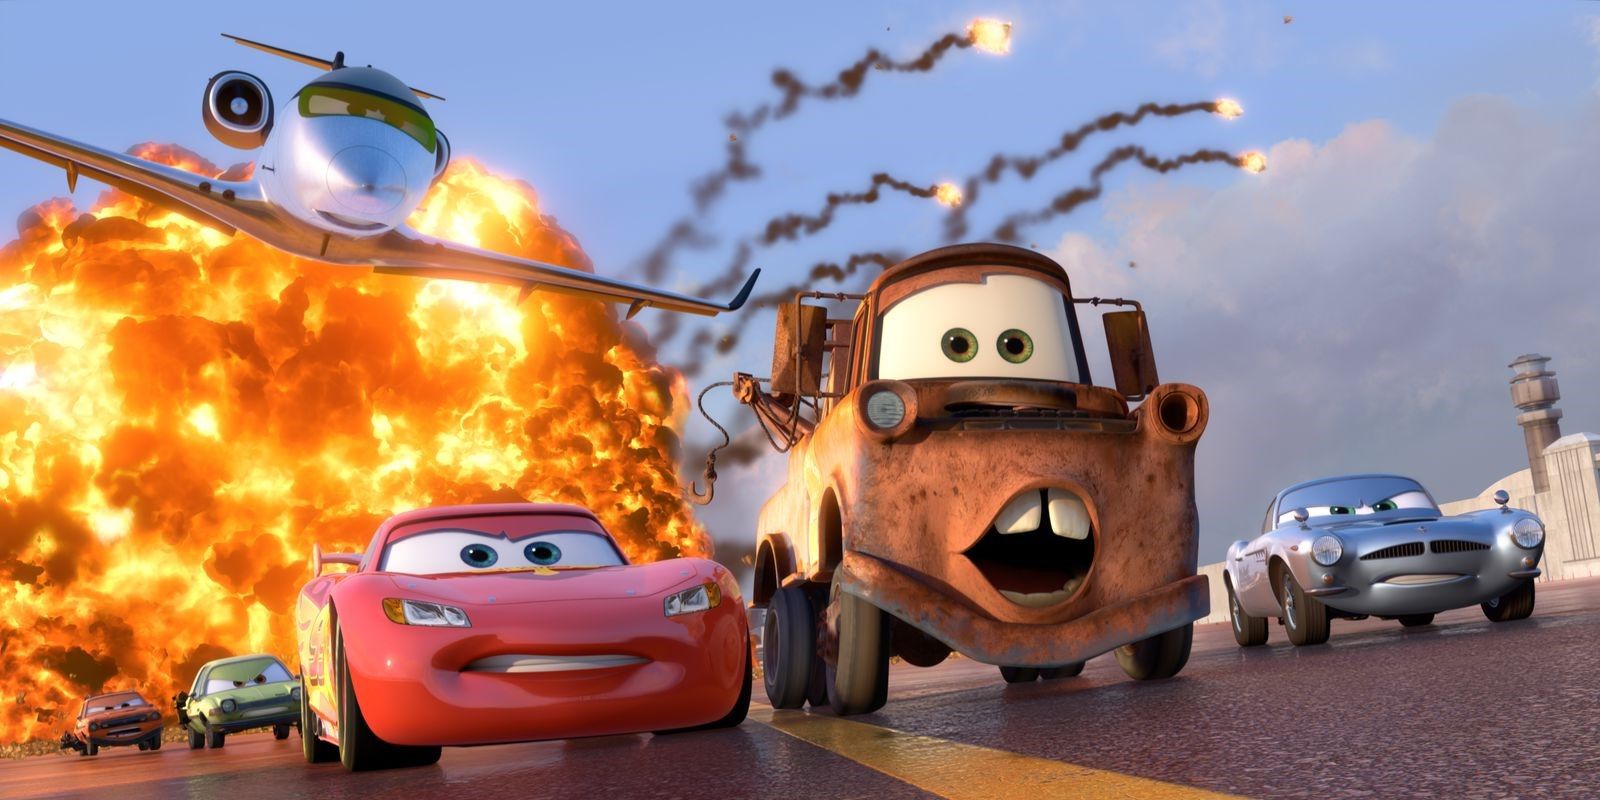 All 26 Pixar Movies Ranked From Worst To Best (Including Lightyear)